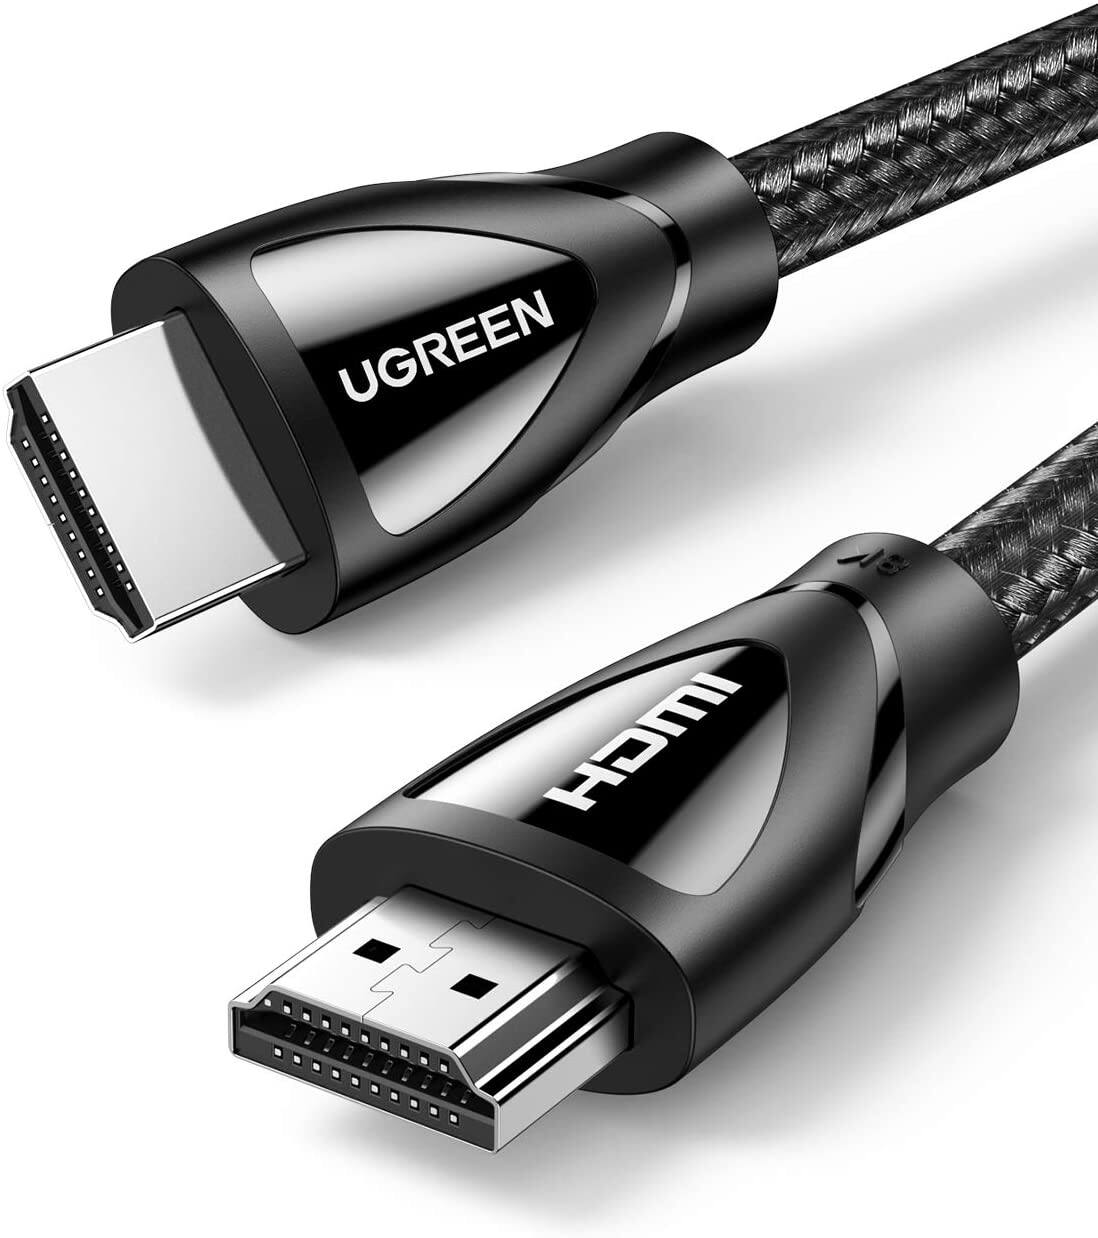 UGREEN 6-Ft 8K 60Hz HDMI 2.1 Cable $6.74 + Free Shipping w/ Amazon Prime or Orders $25+